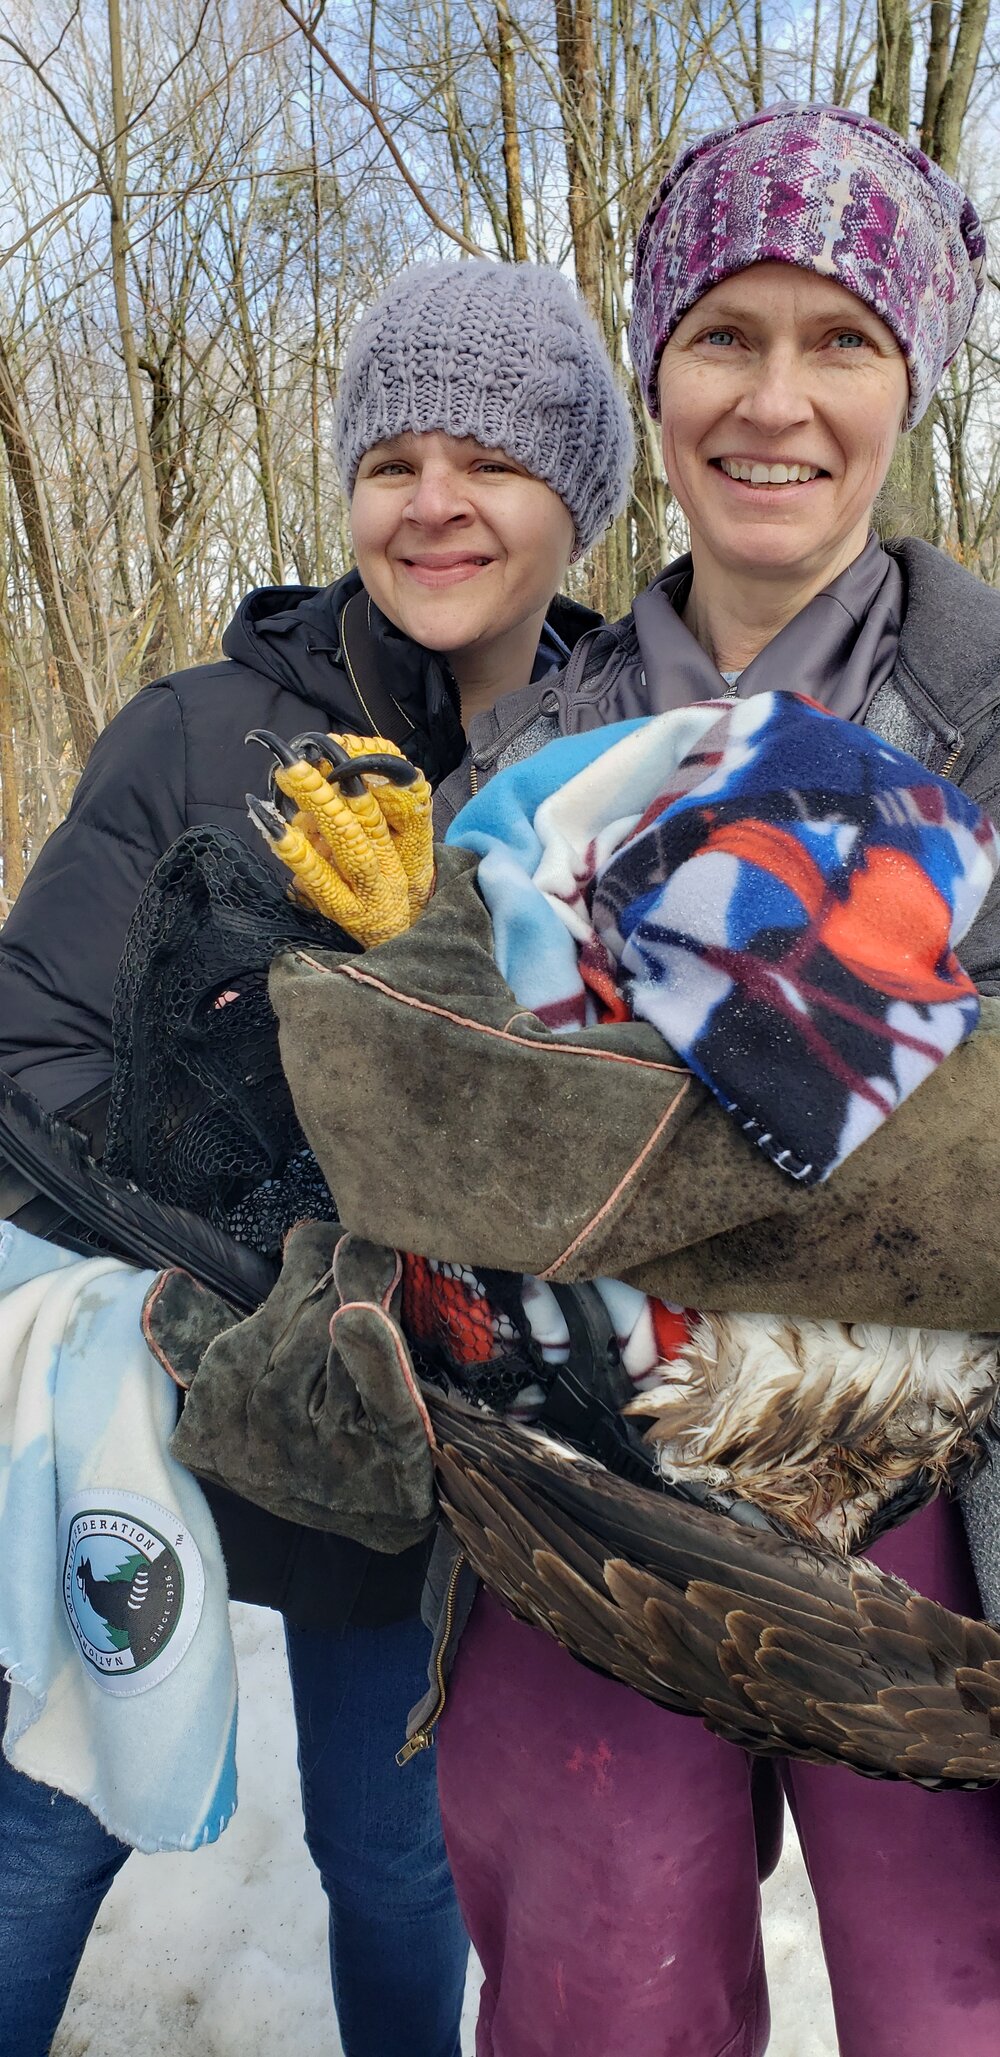  Cindy Saraceno pictured with injured juvenile Bald eagle being held by Christine Cummings, Wildlife Rehabilitator  Photo credit: Amy Poturnicki 